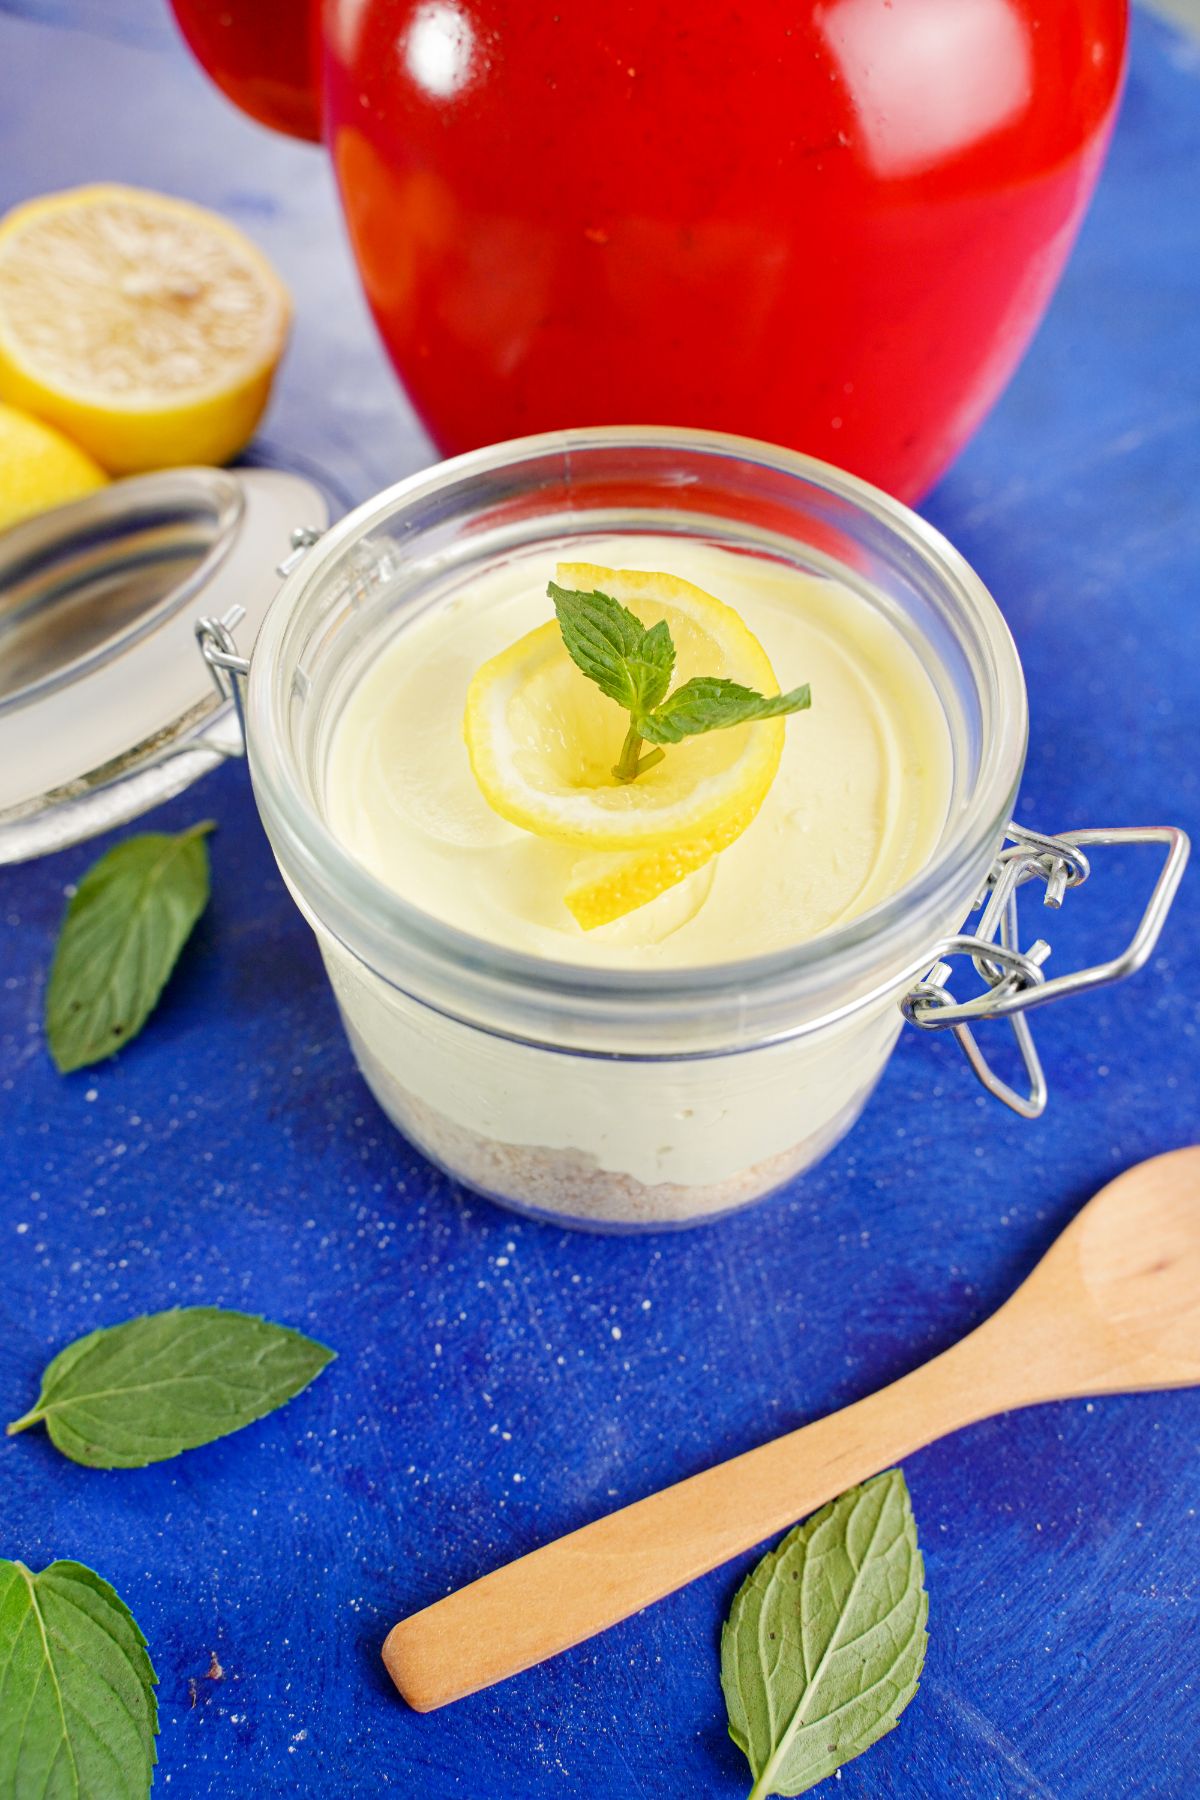 Creamy Lemon Mousse decorated in a jar